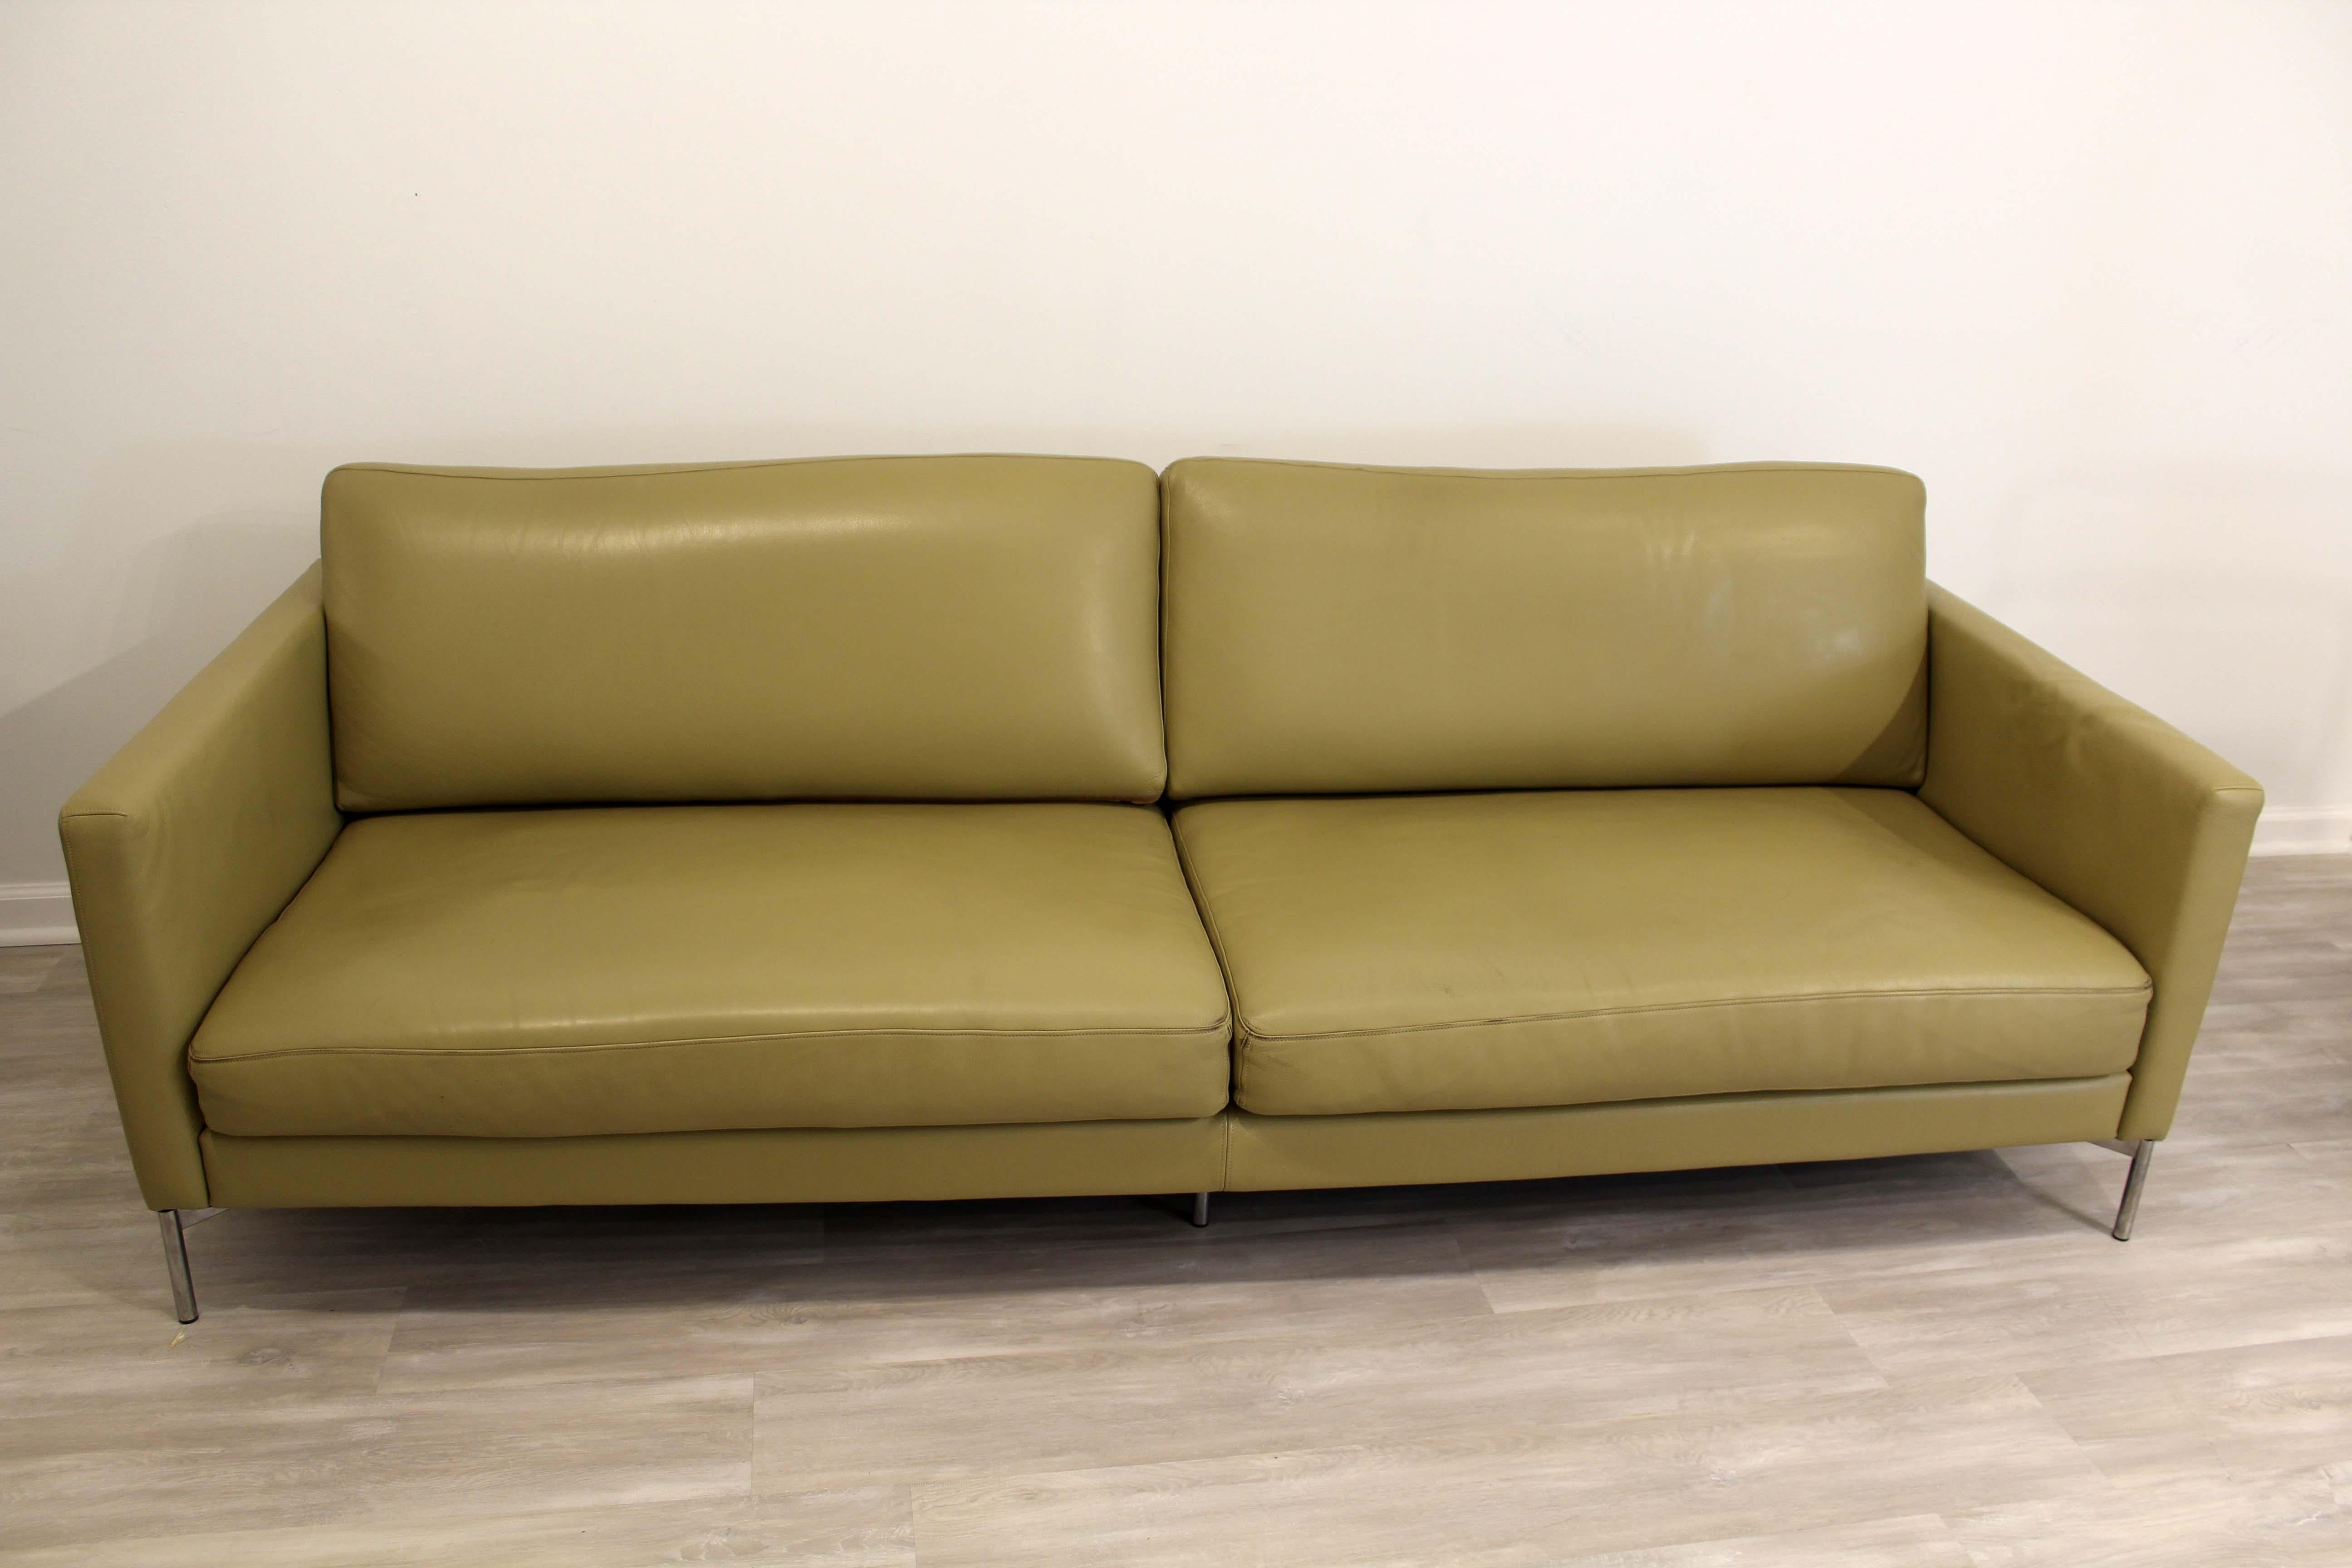 Le Shoppe Too in Michigan brings you this stunning Knoll Divina full size sofa in a light celery green Aniline leather manufactured in 2012, marked on the underside. Clean lines and exceptional comfort characterize the Divina Sofa from Italy’s Piero